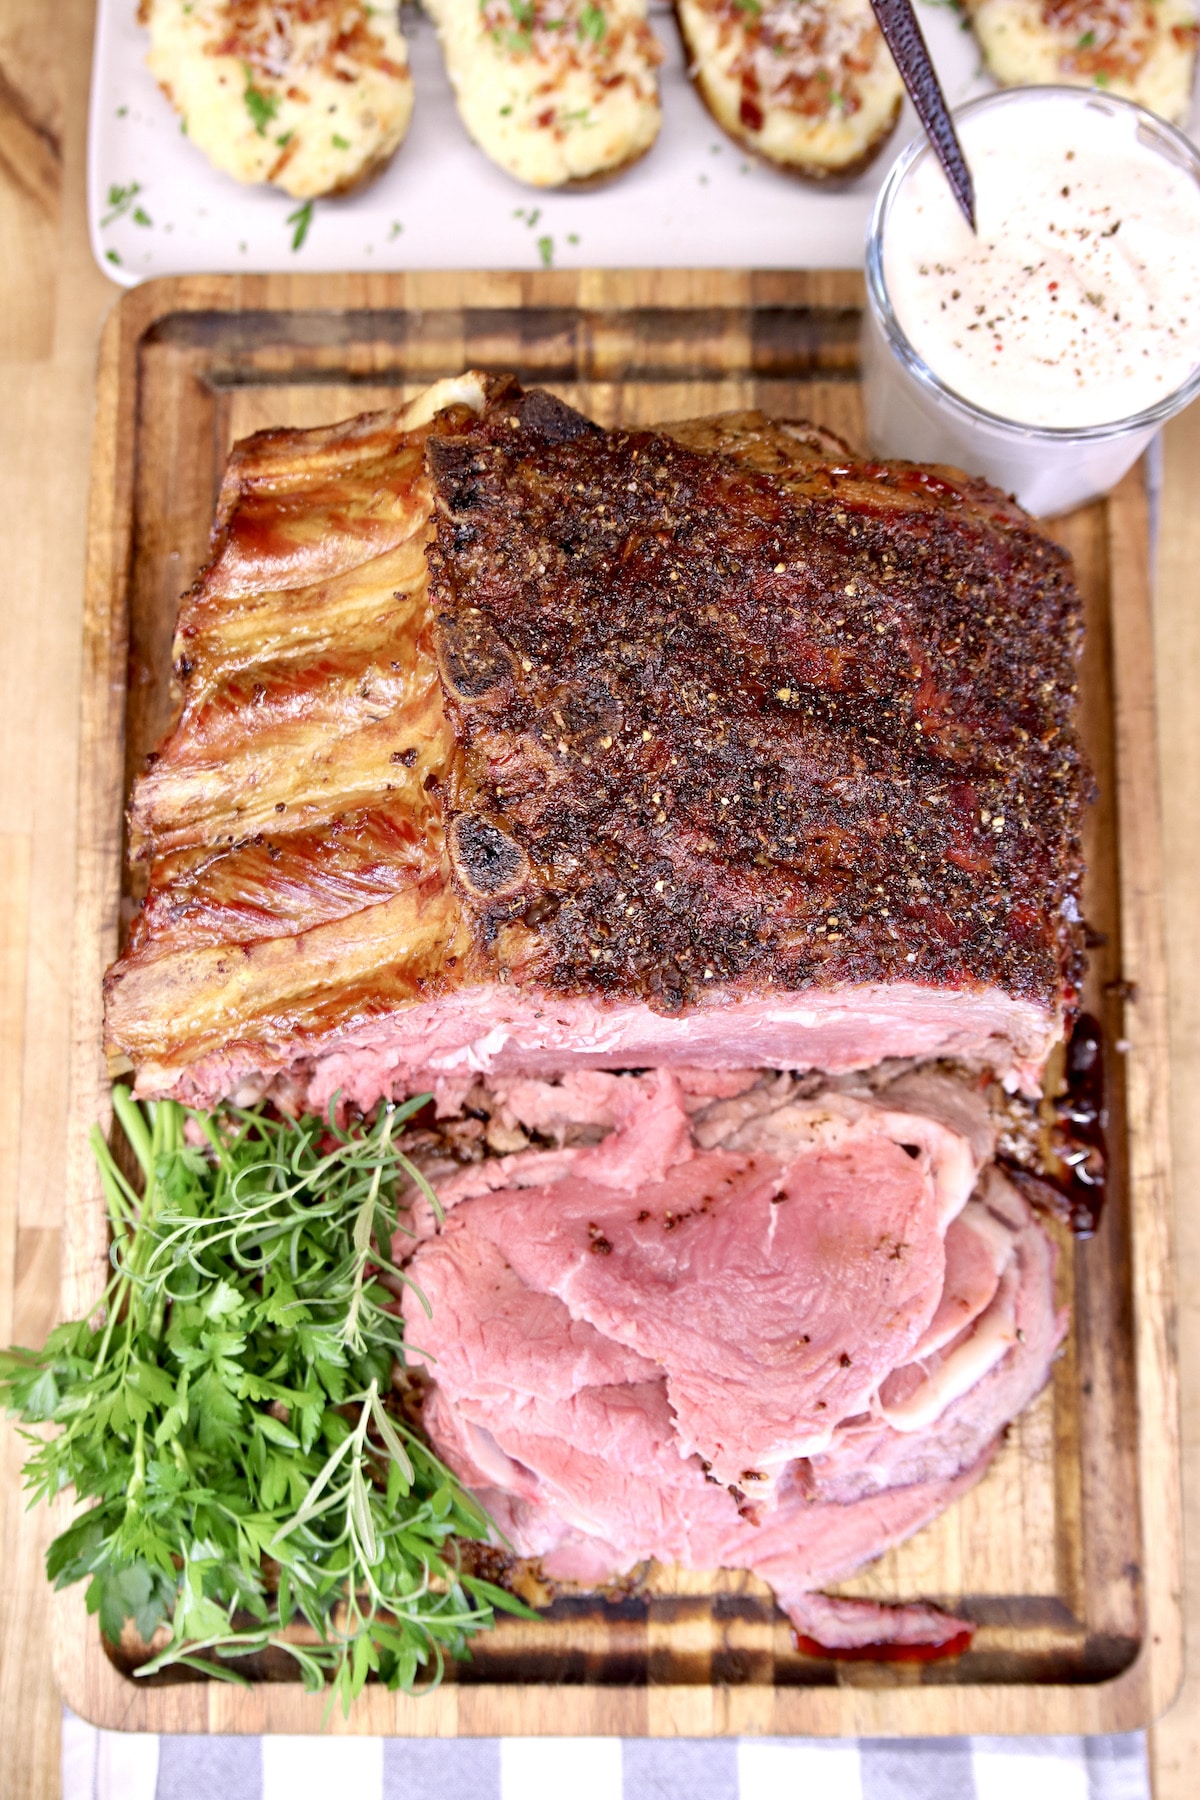 Overhead view of standing rib roast, partially sliced on cutting board.